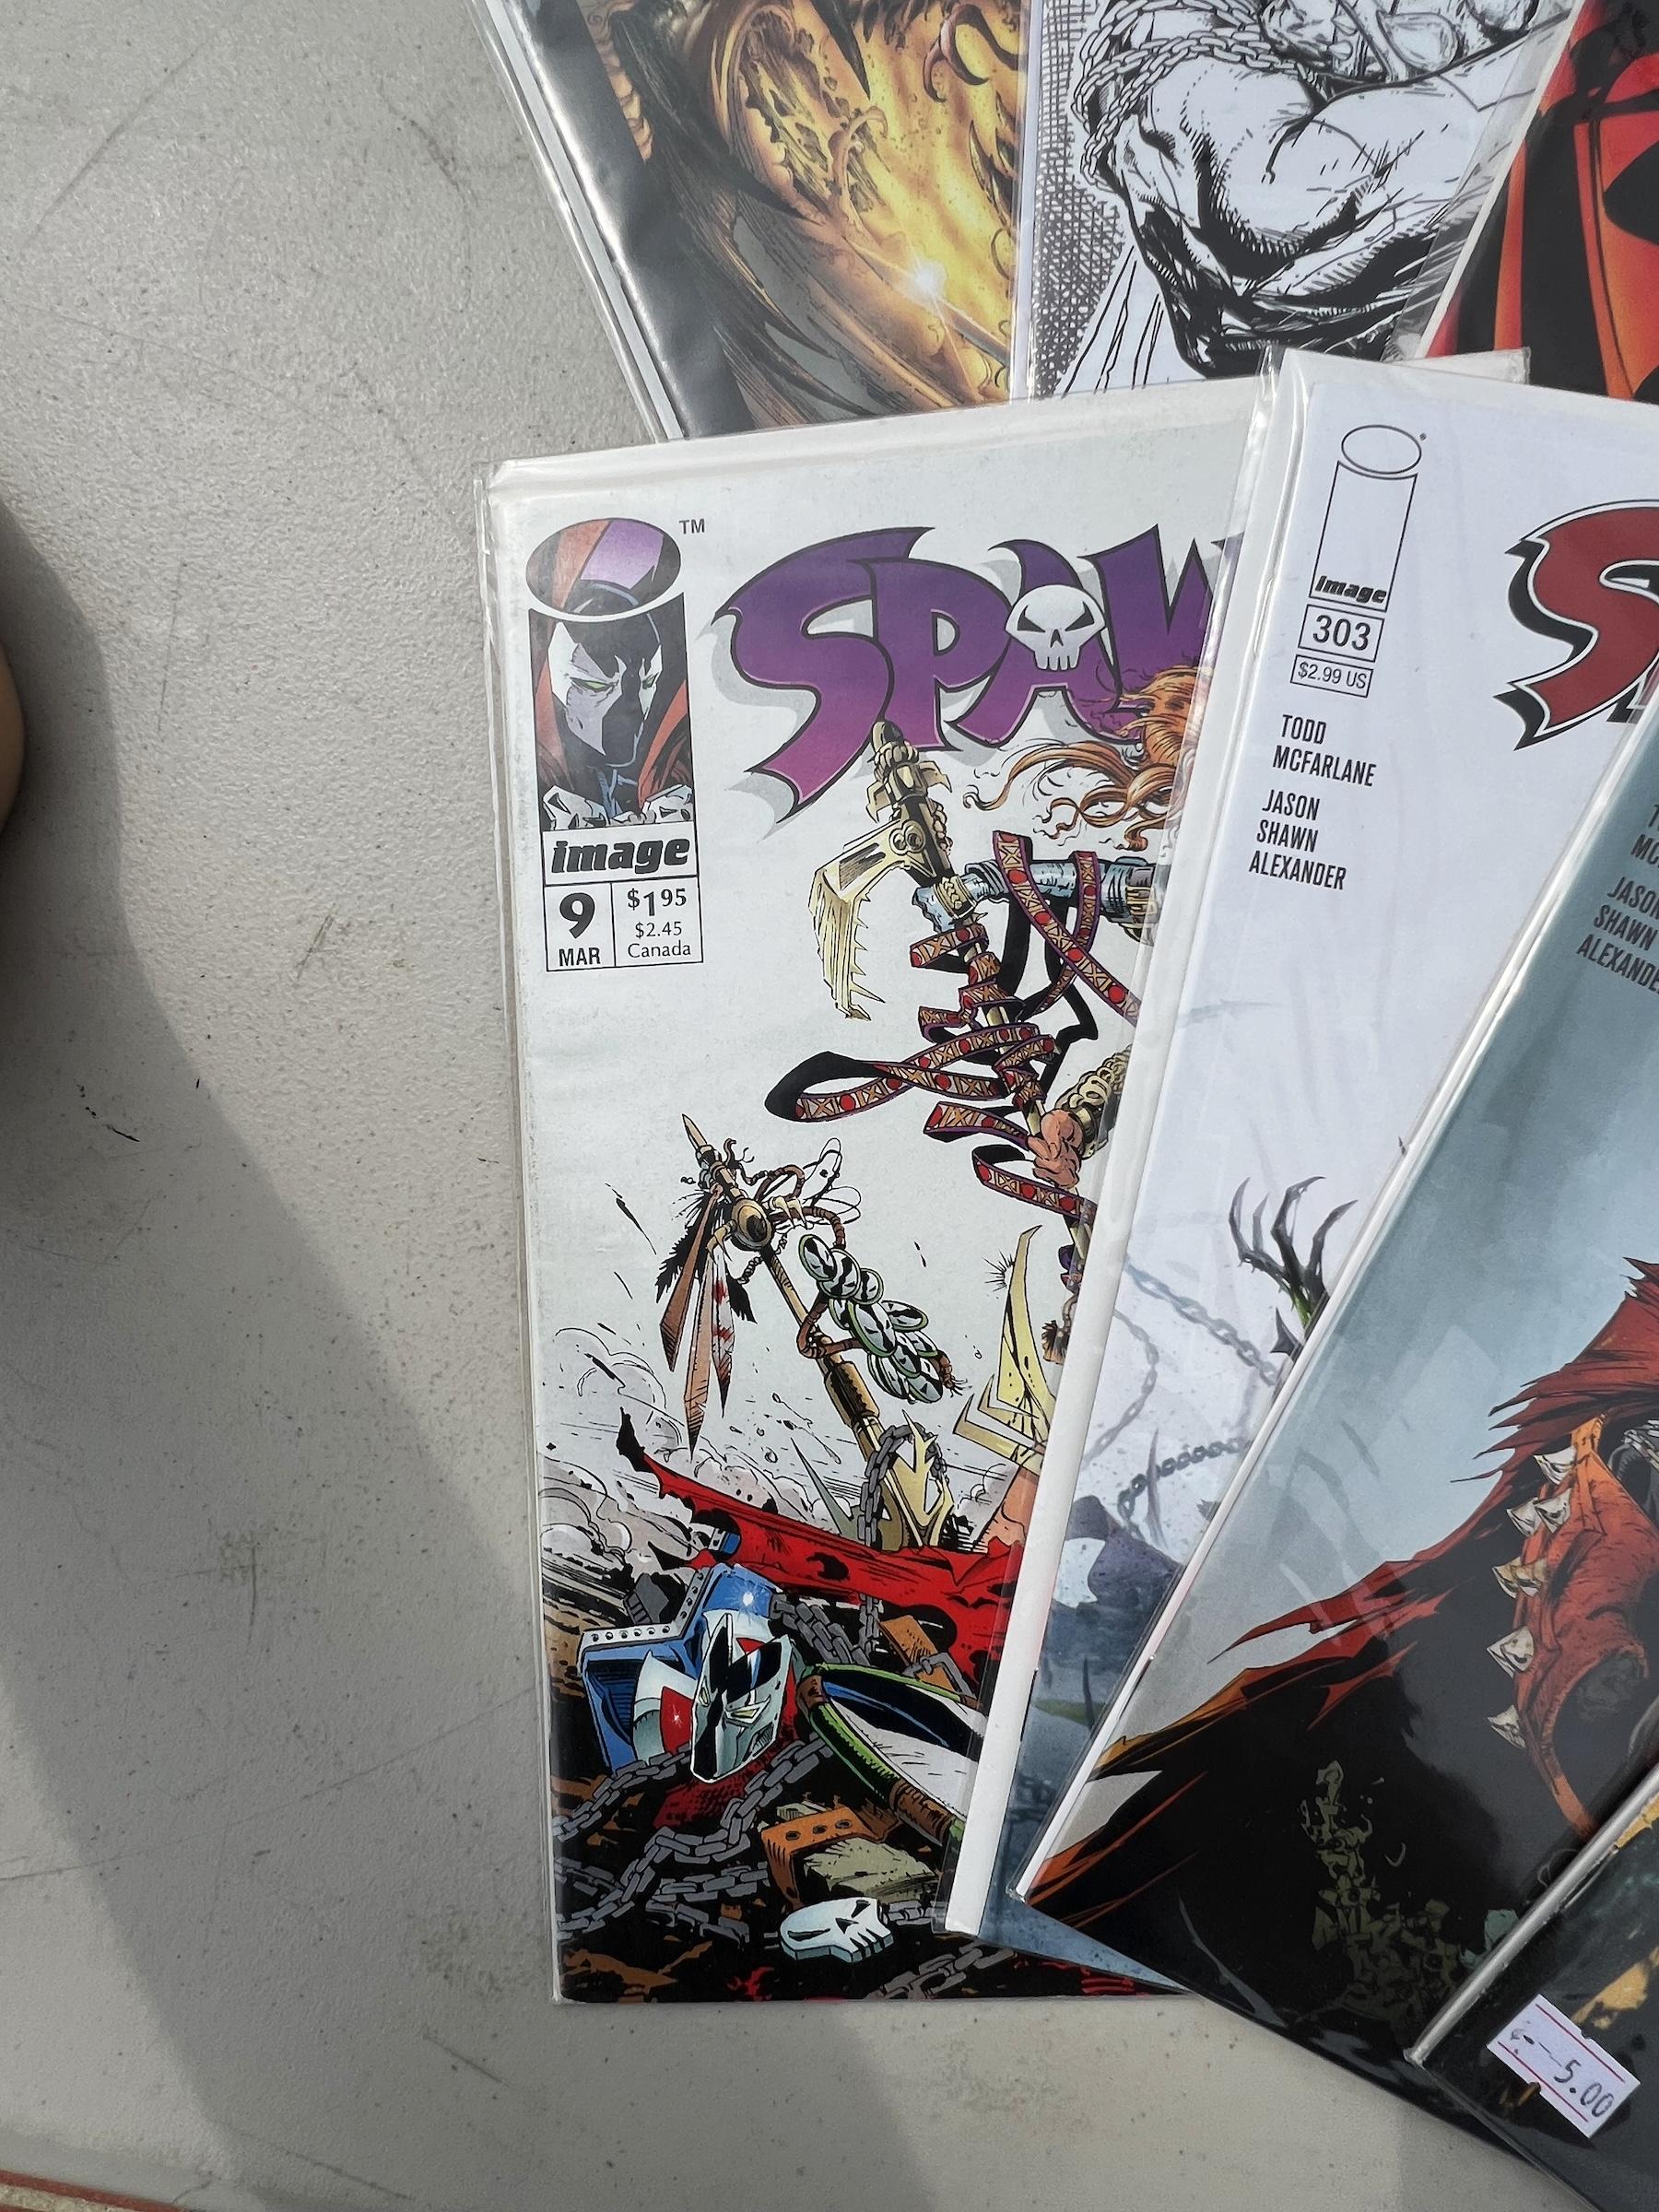 Comic Book Spawn Collection lot 10 NF